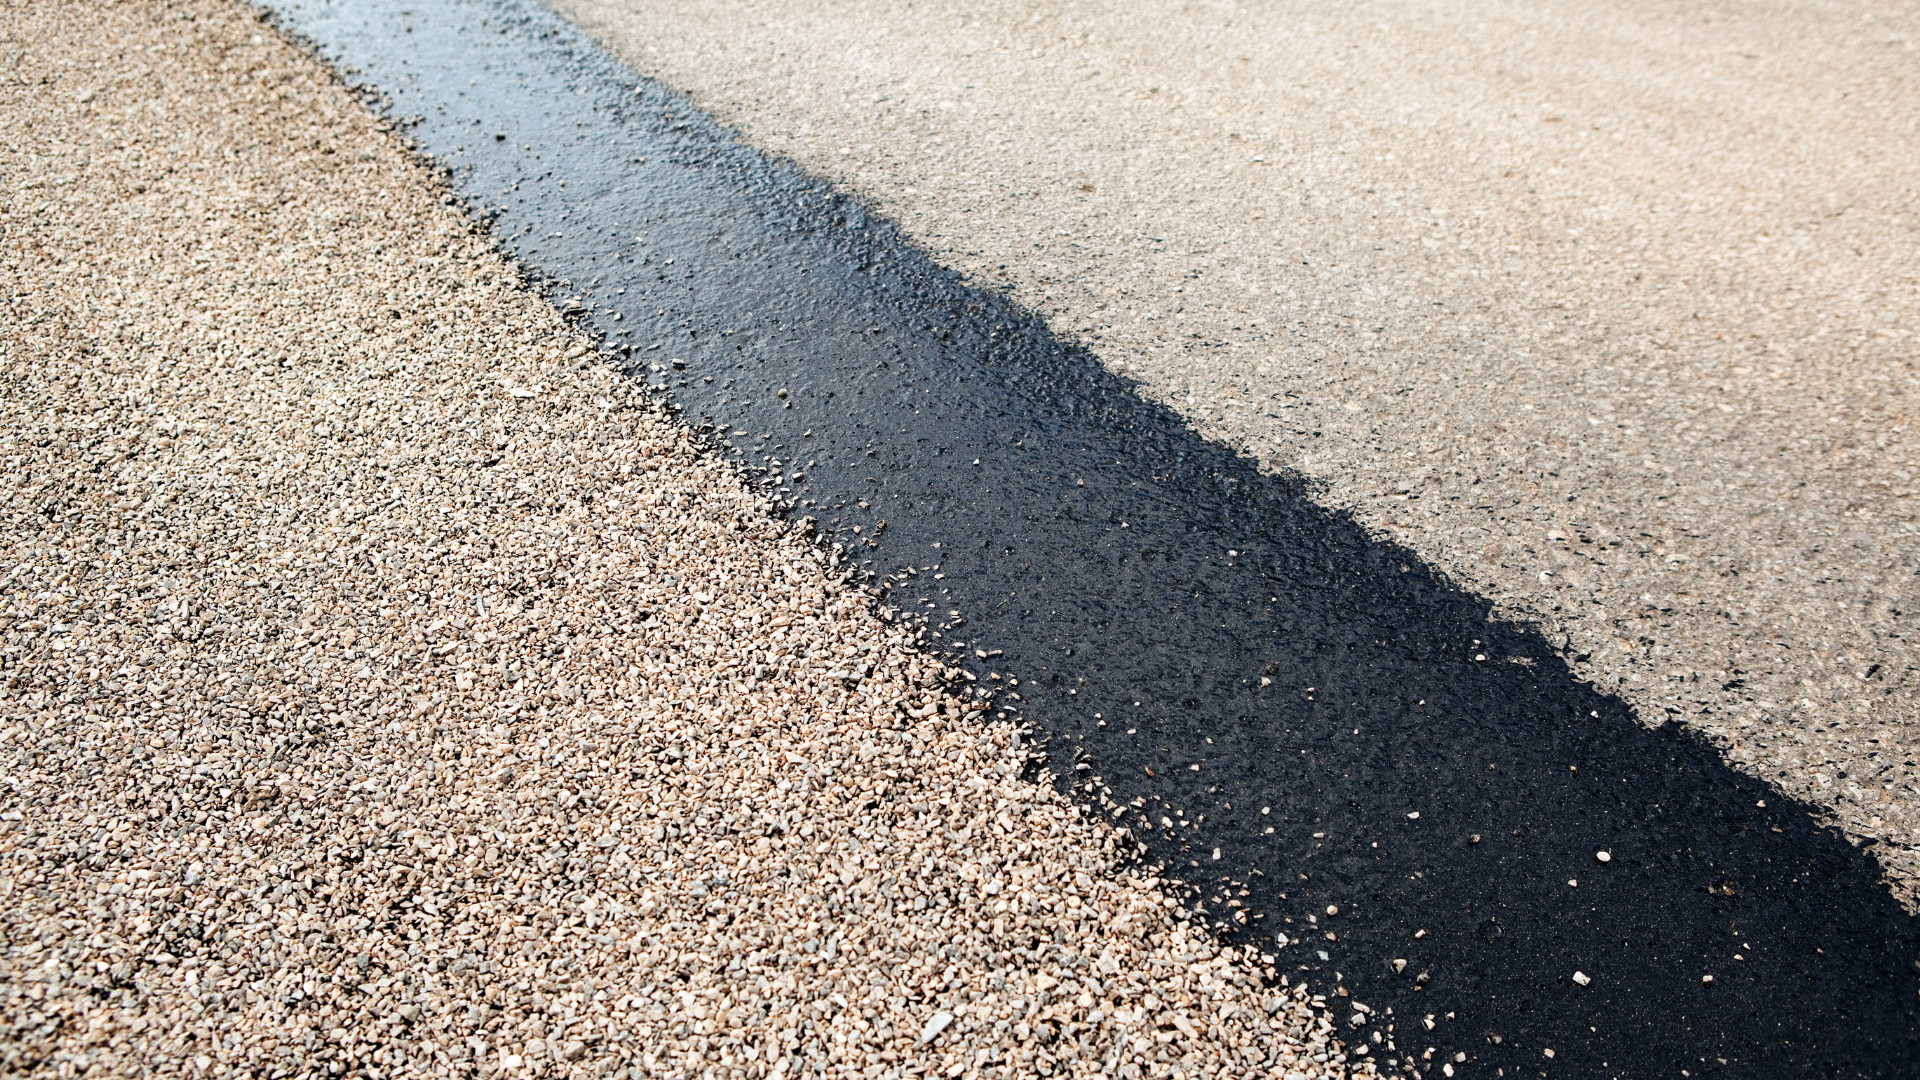 Chip seal application is used to maintain and preserve deteriorated pavements. It is also used to restore surface texture and friction to improve skid resistance and improve the safety of a roadway.